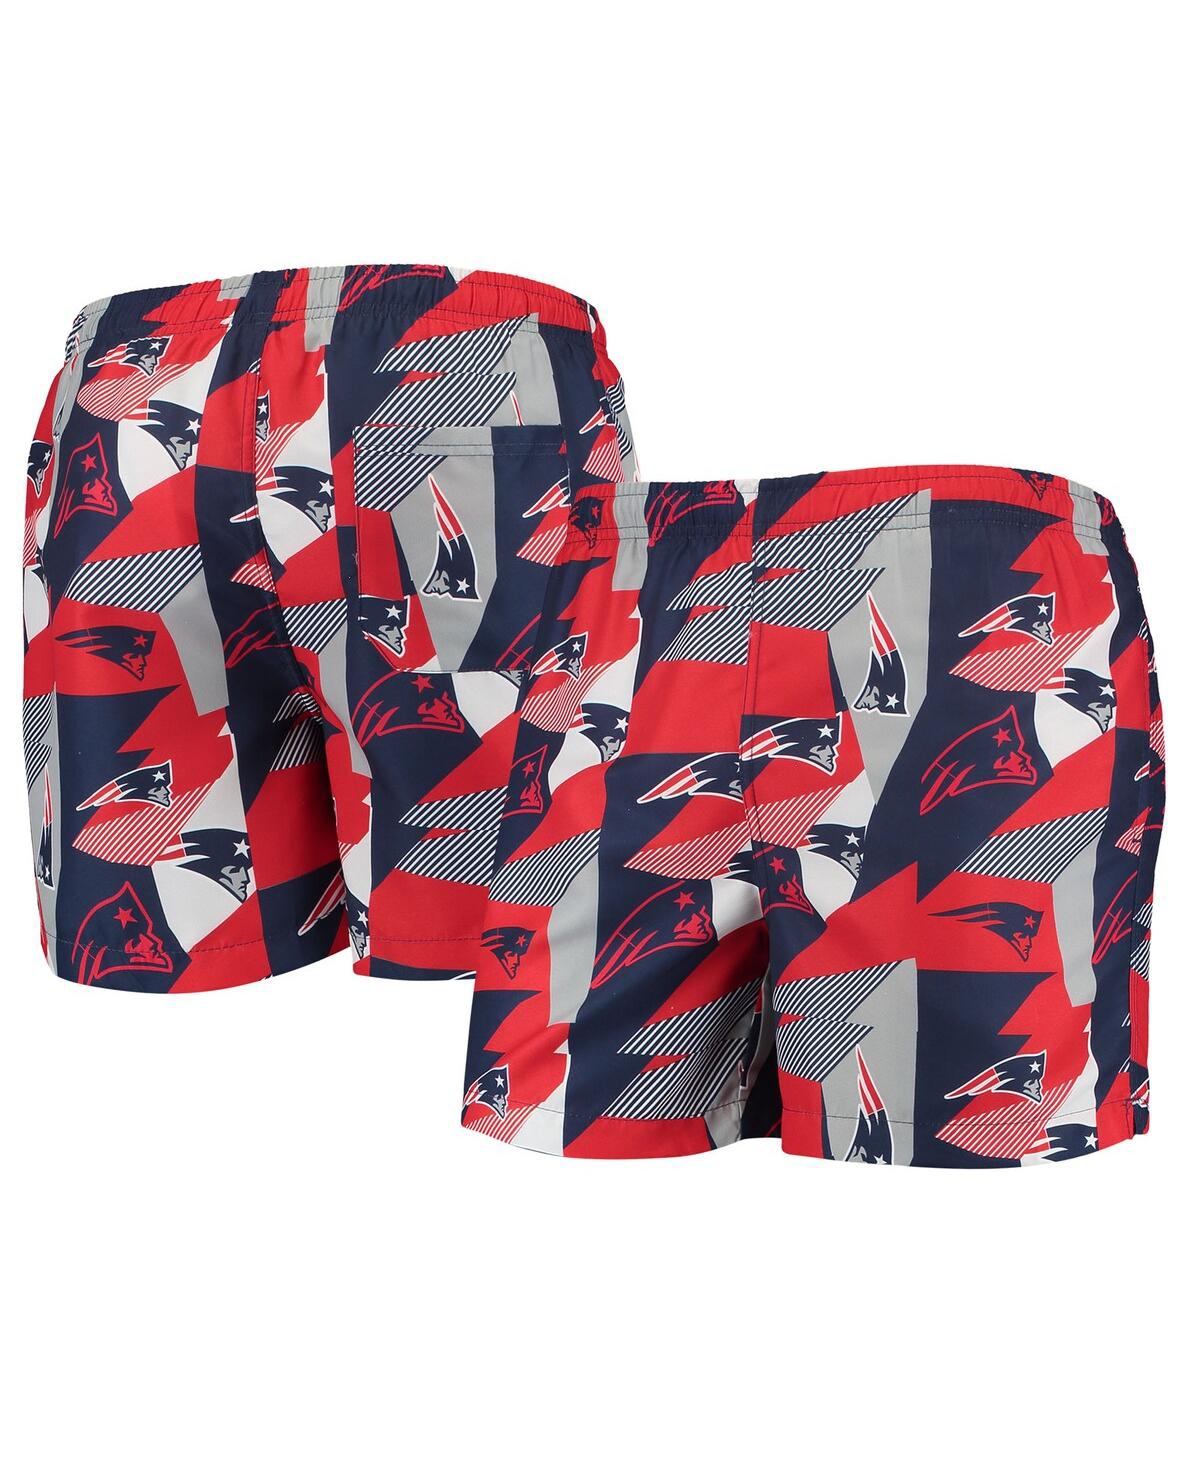 Men's Foco Navy and Red New England Patriots Geo Print Swim Trunks - Navy, Red